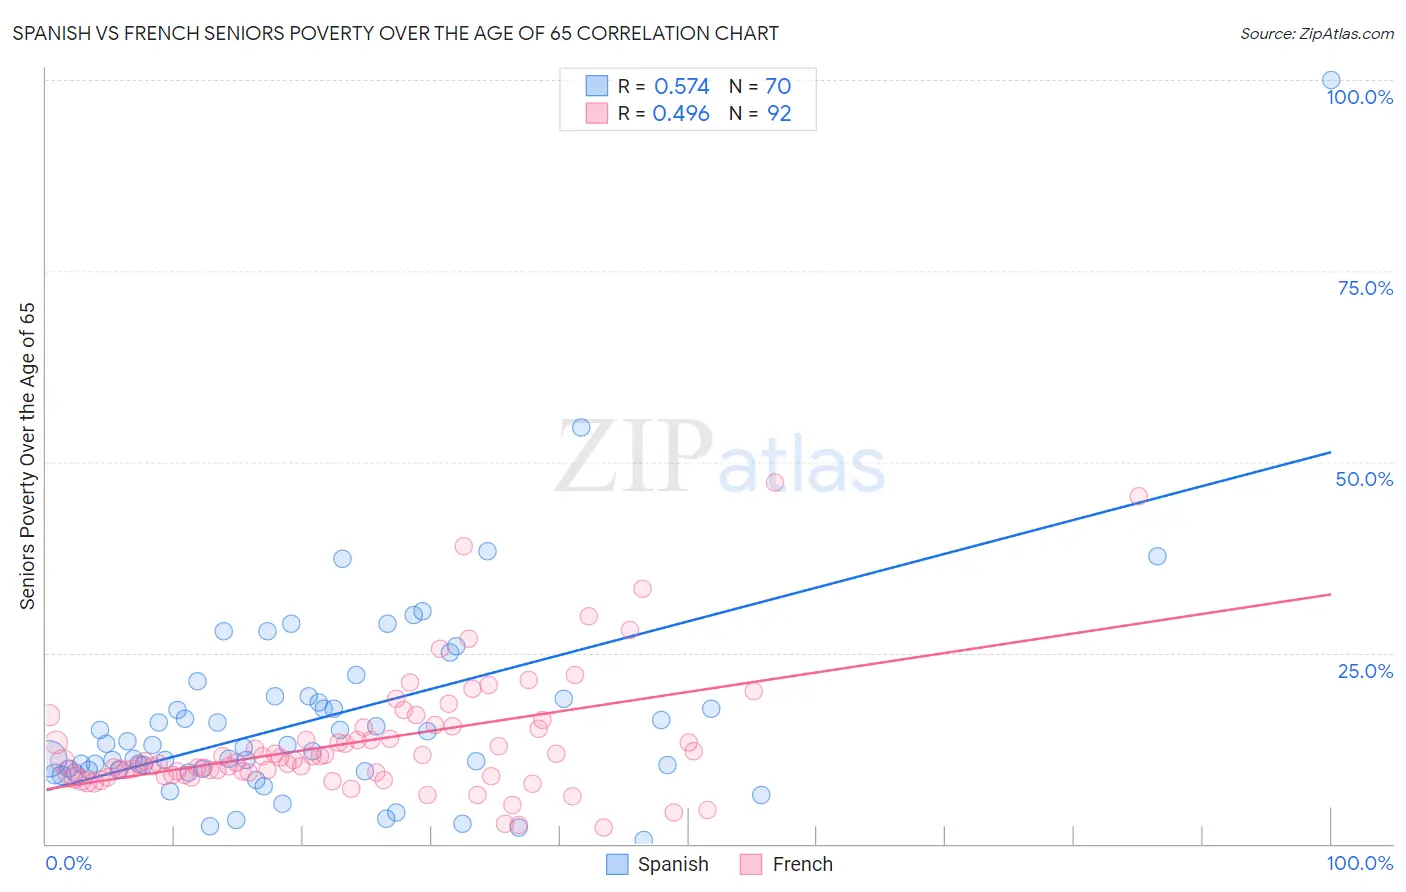 Spanish vs French Seniors Poverty Over the Age of 65